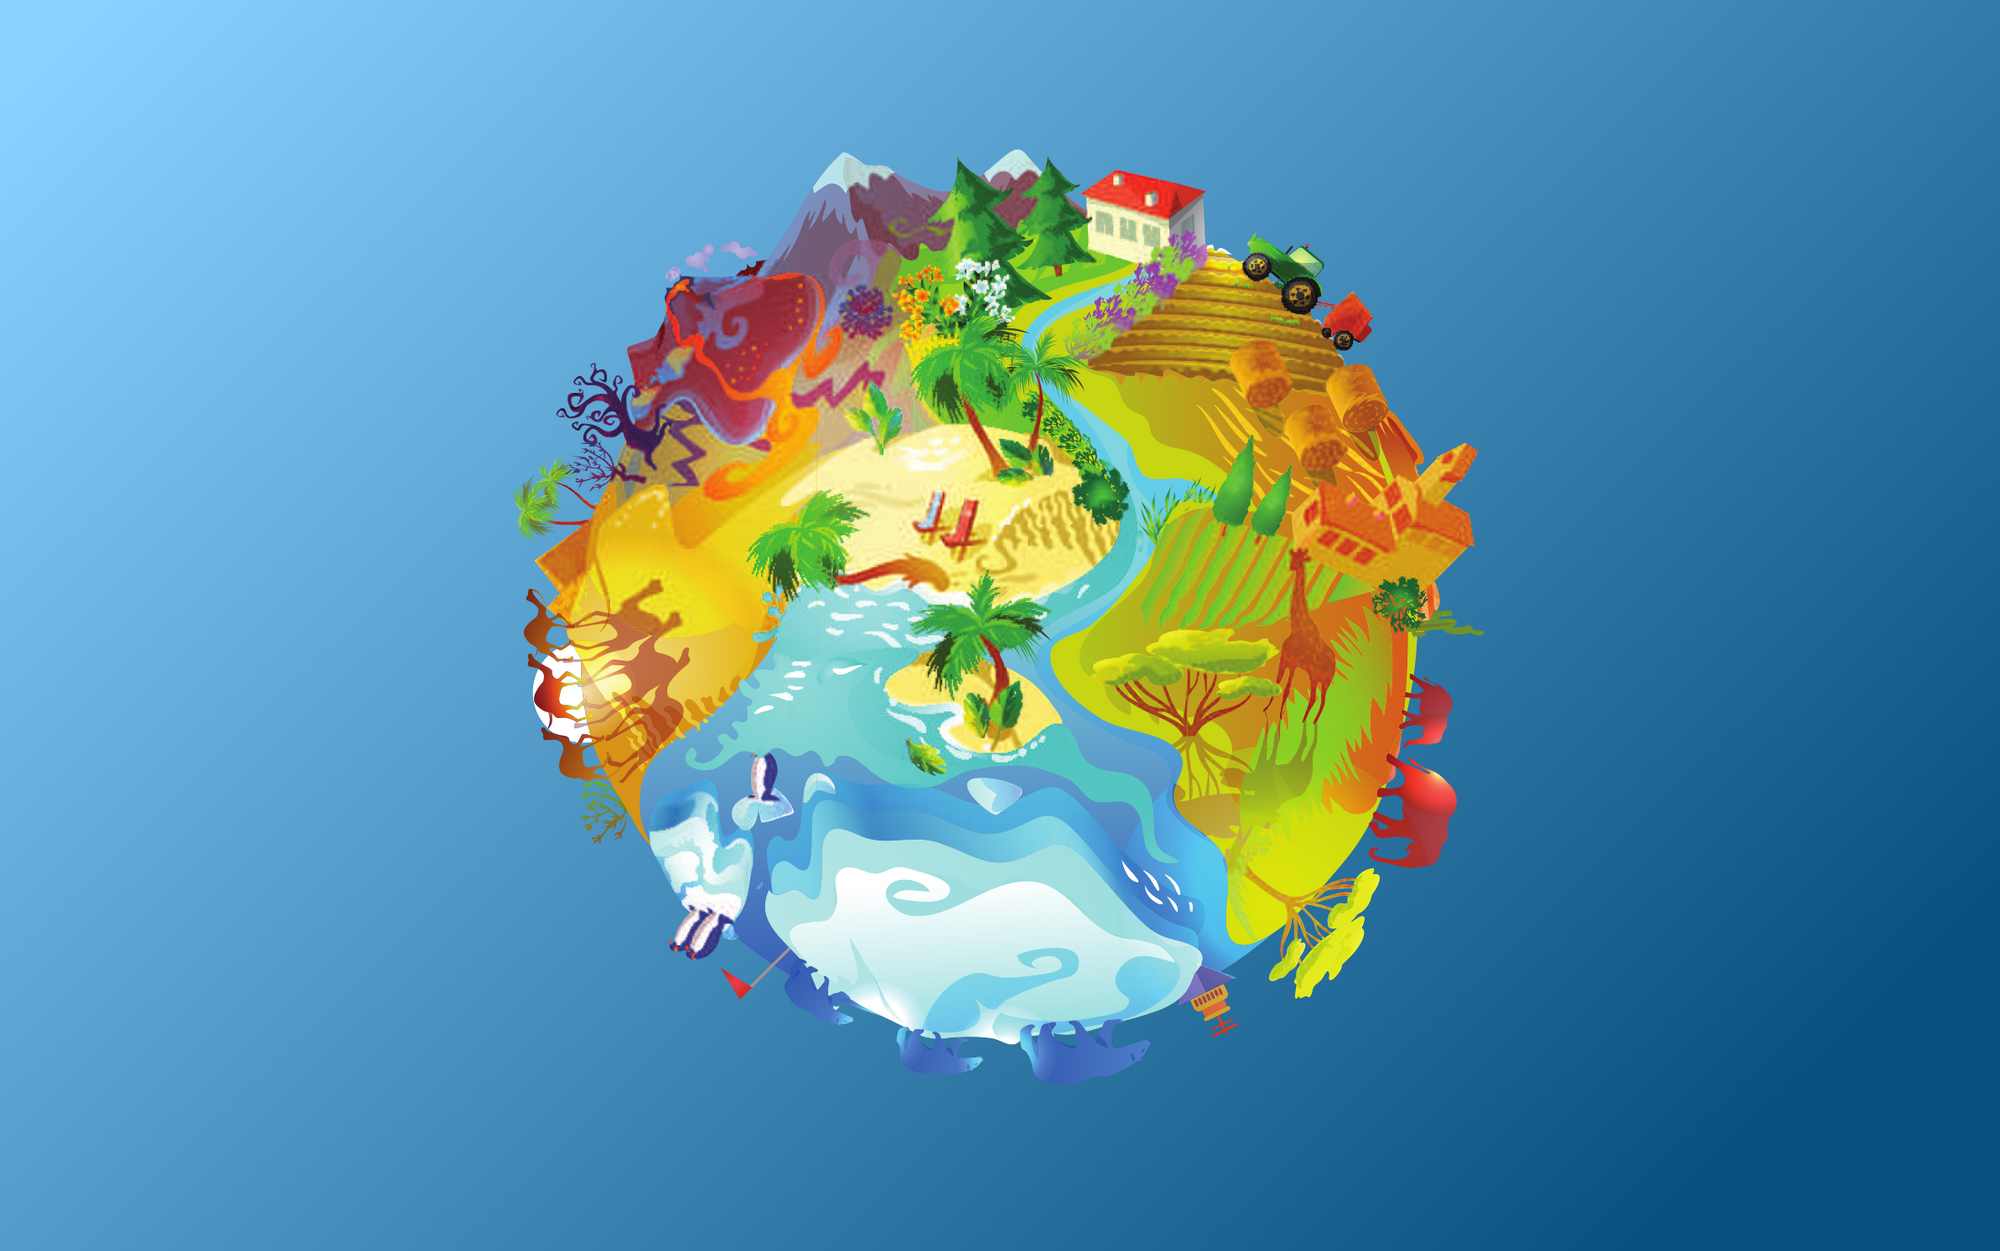 Illustration of a globe with different landscapes, seasons and animals, a desert, a farm, a volcano and a tropical island.